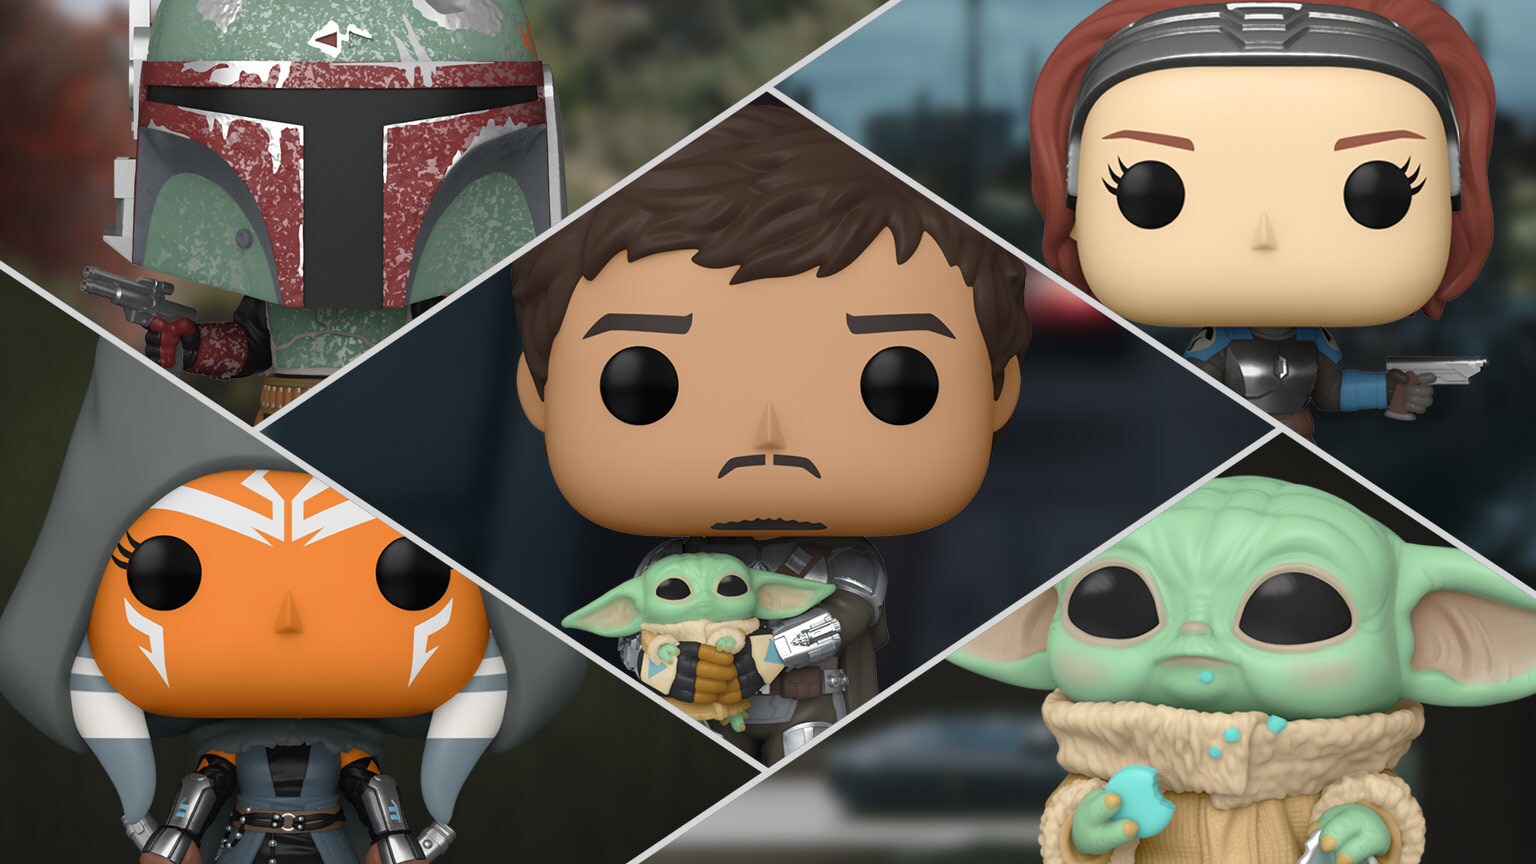 Mando Shows his Face in Funko's New The Mandalorian Pop! Bobbleheads - Exclusive Reveal